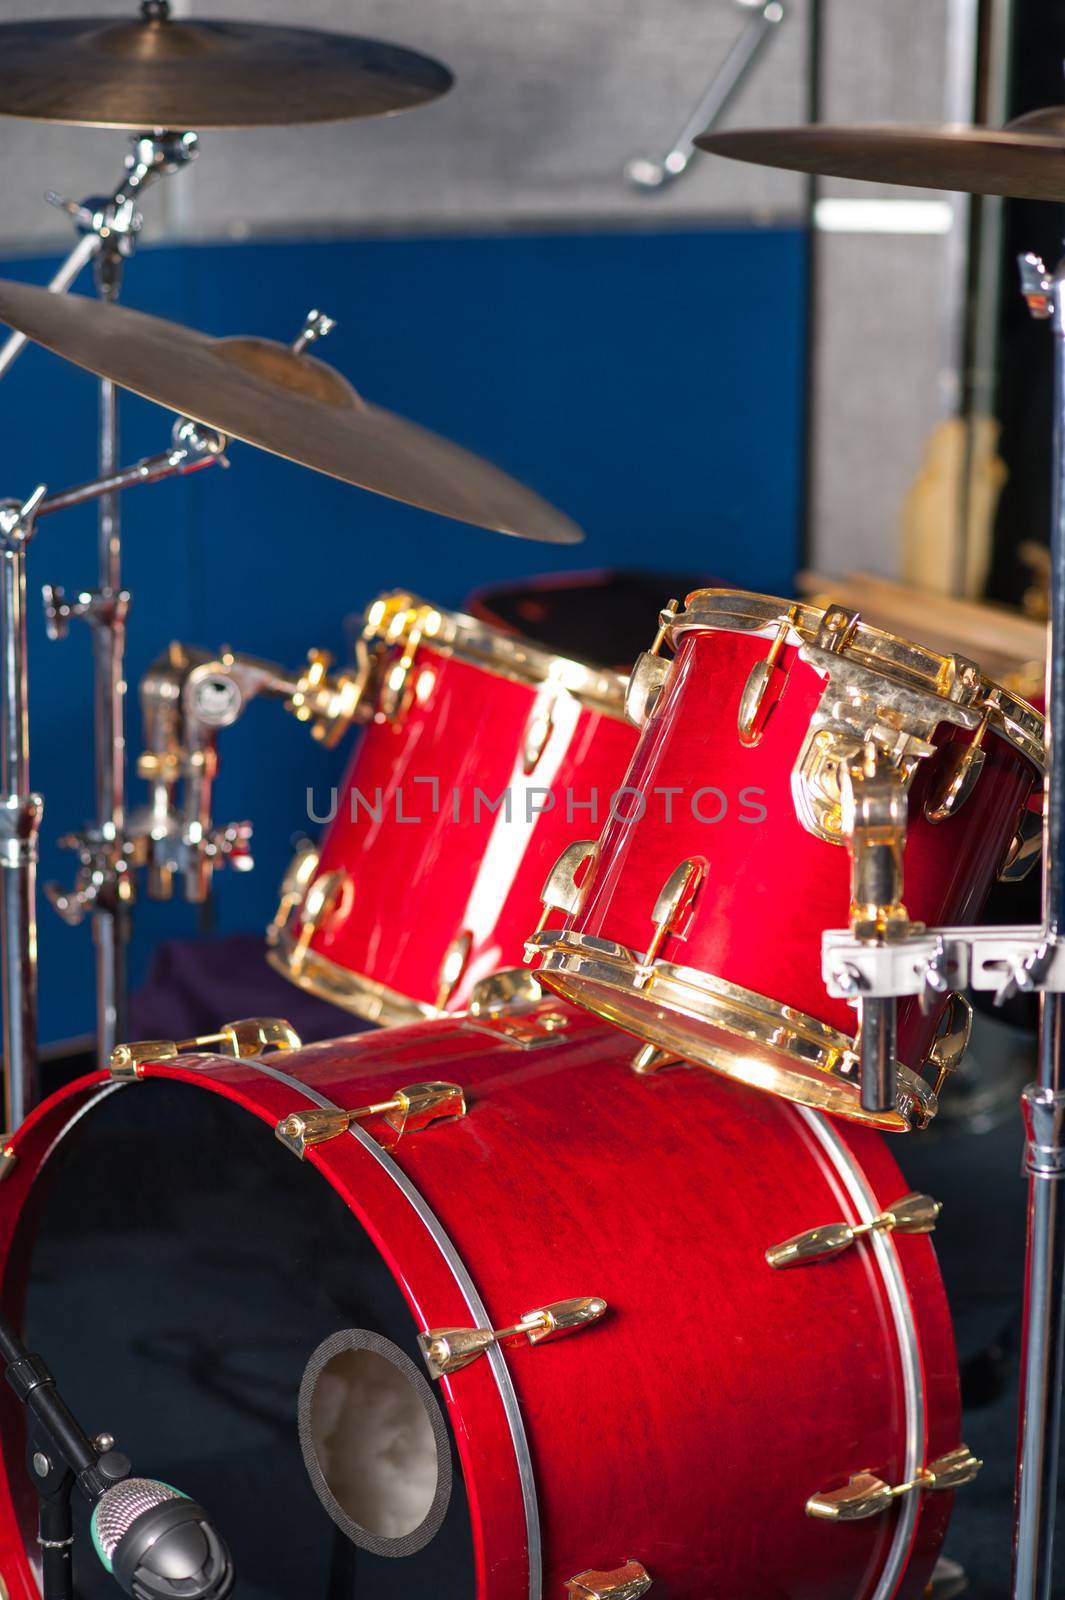 The red drum set inside studio by stockyimages